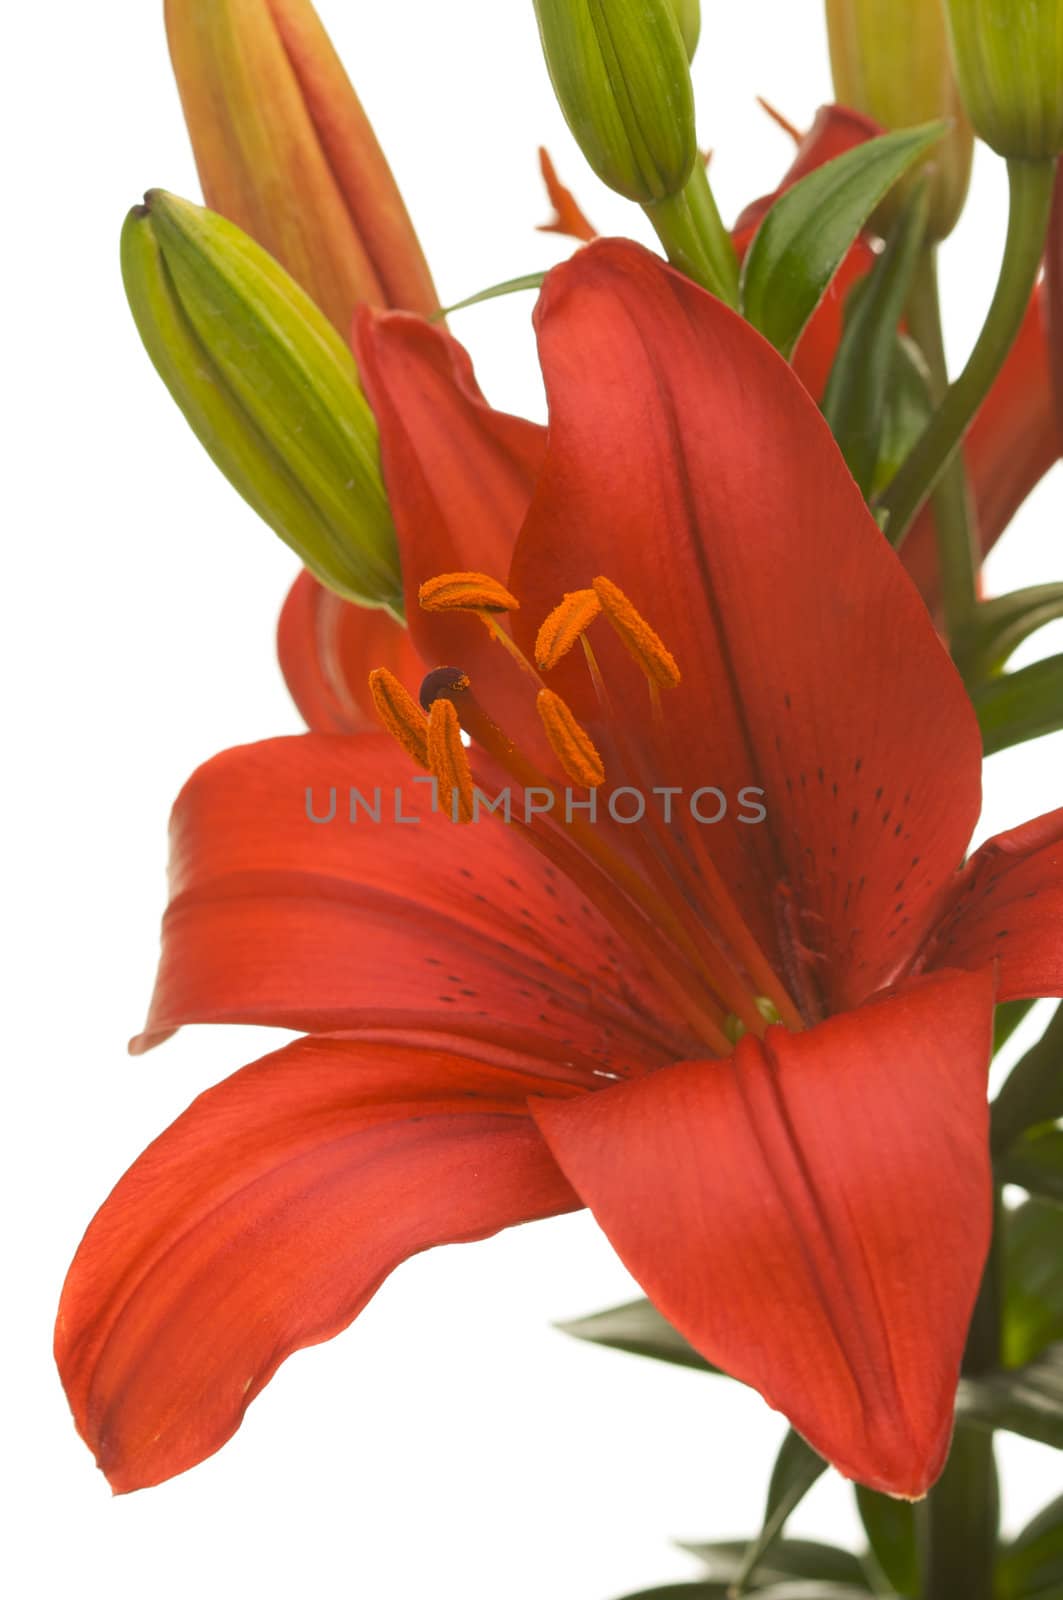 Beautiful Asiatic Lily Bloom by Feverpitched